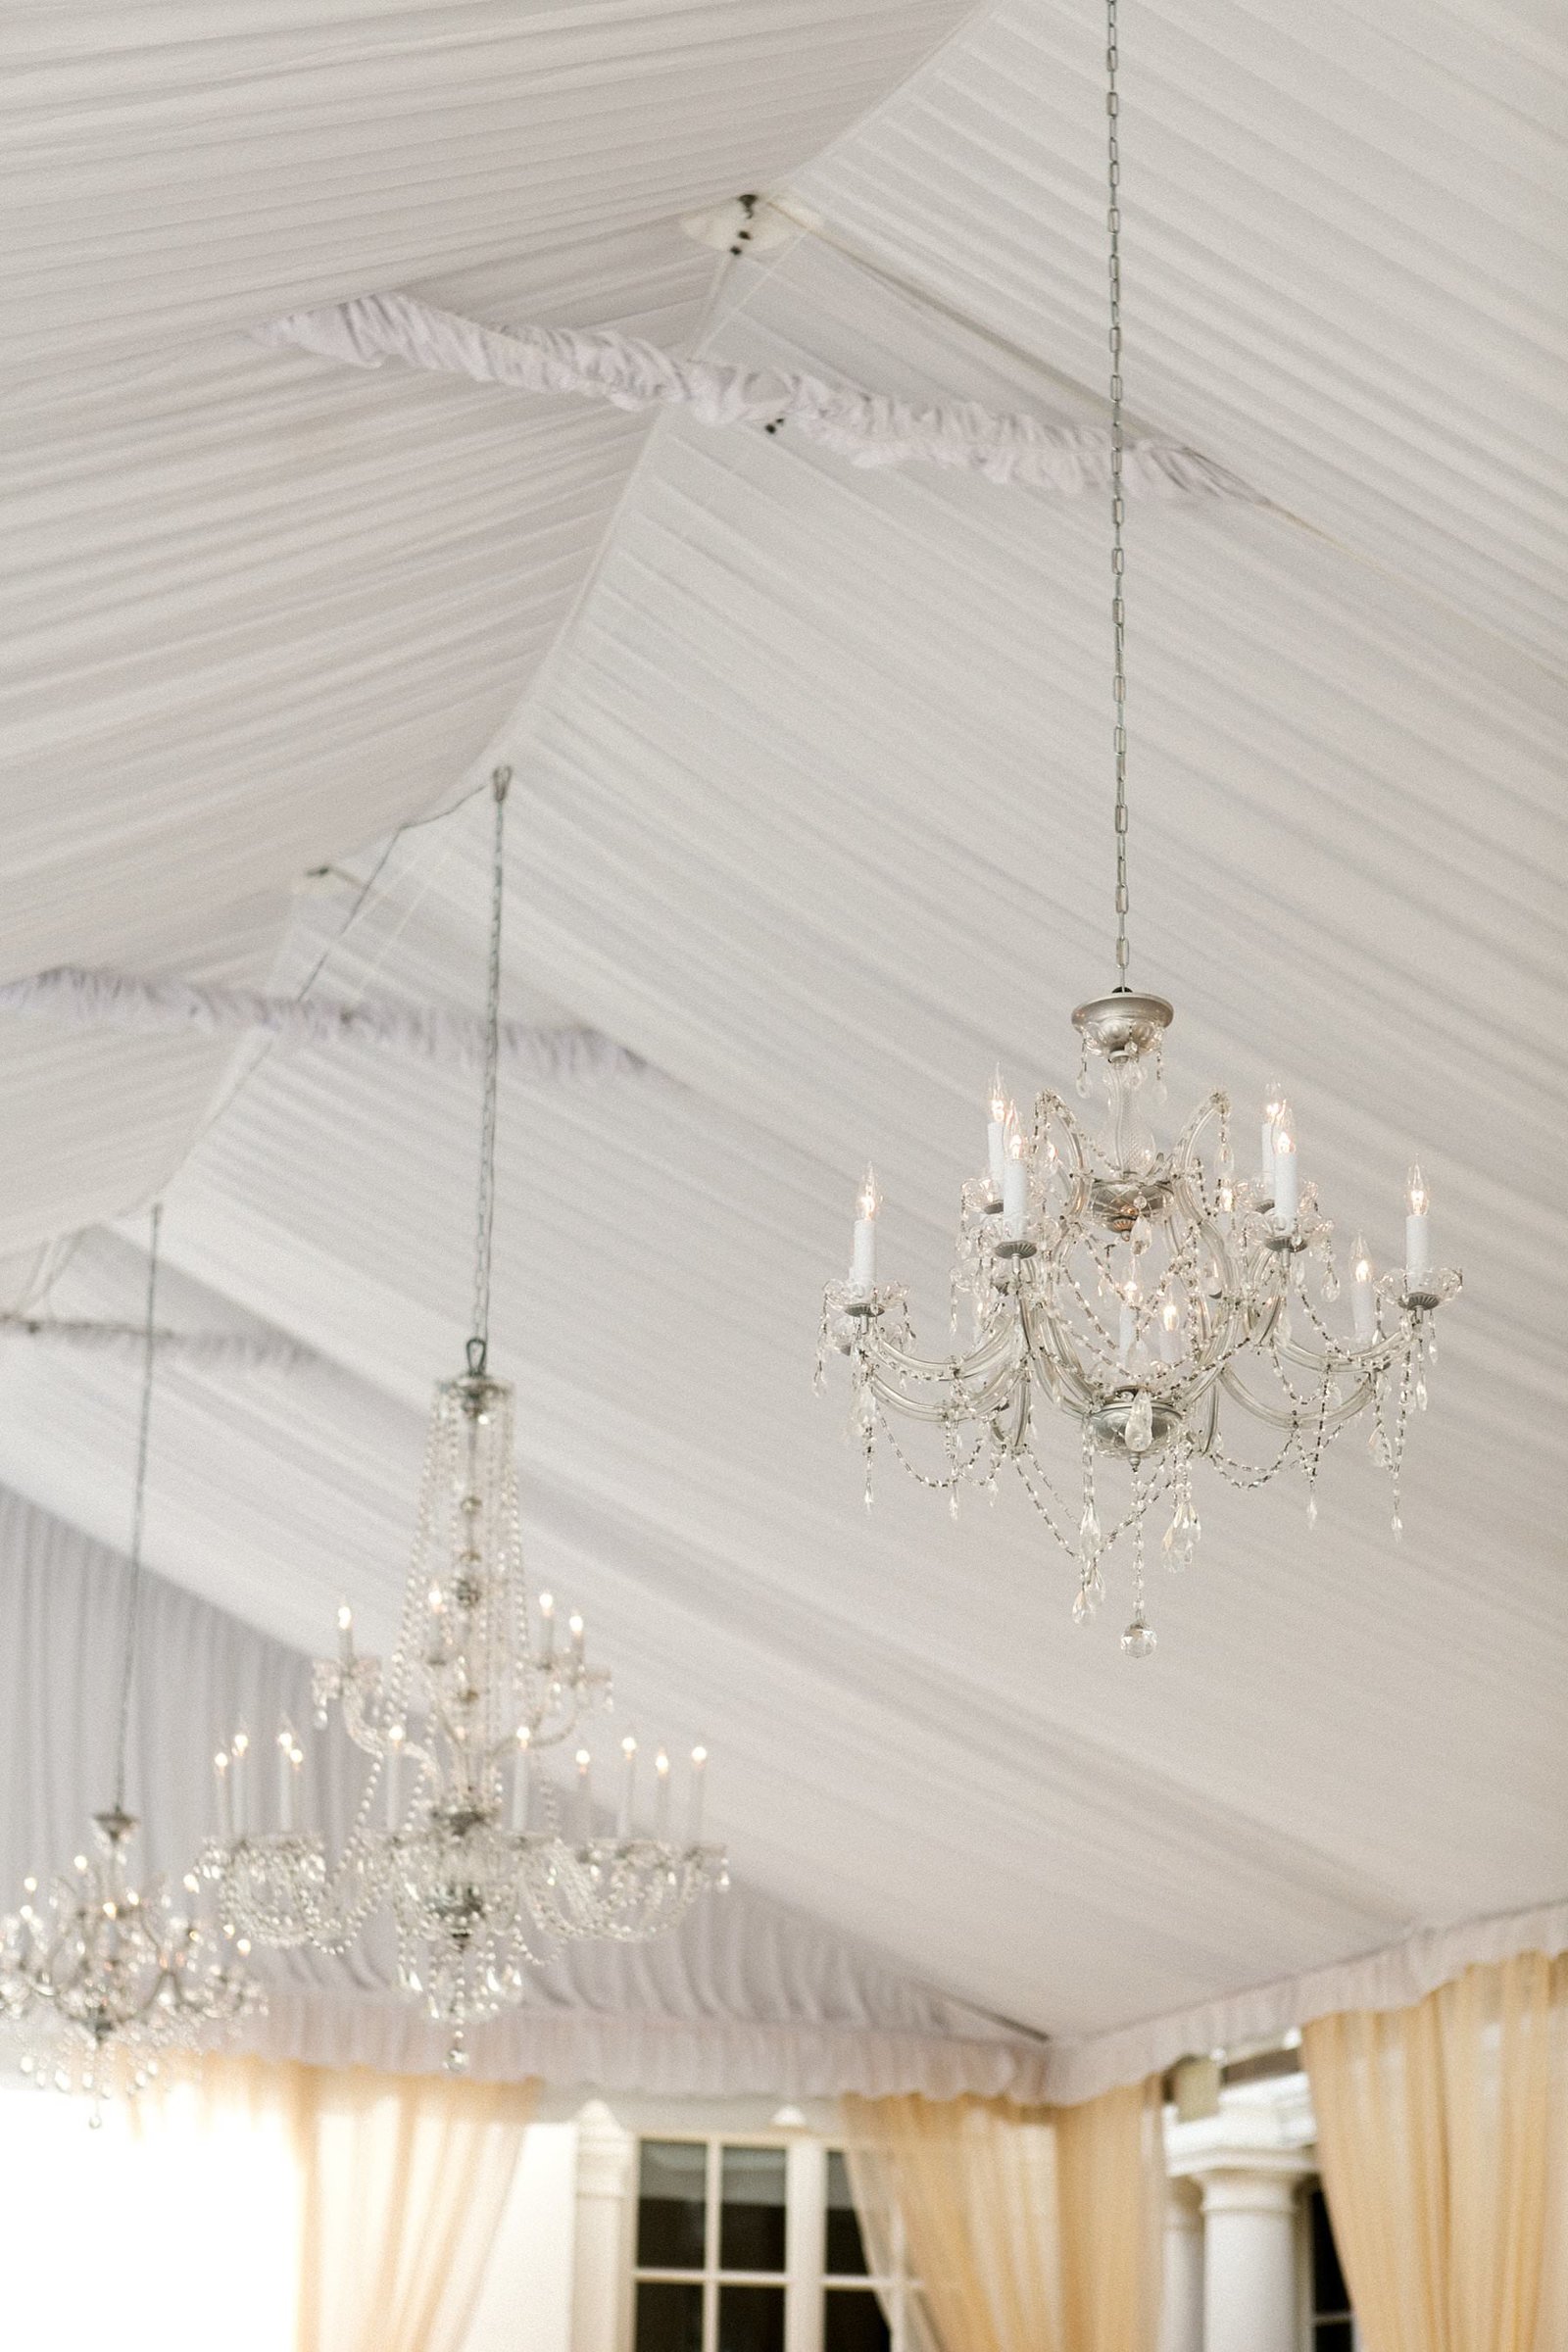 tented-wadsworth-mansion-wedding-middletown-ct_0060